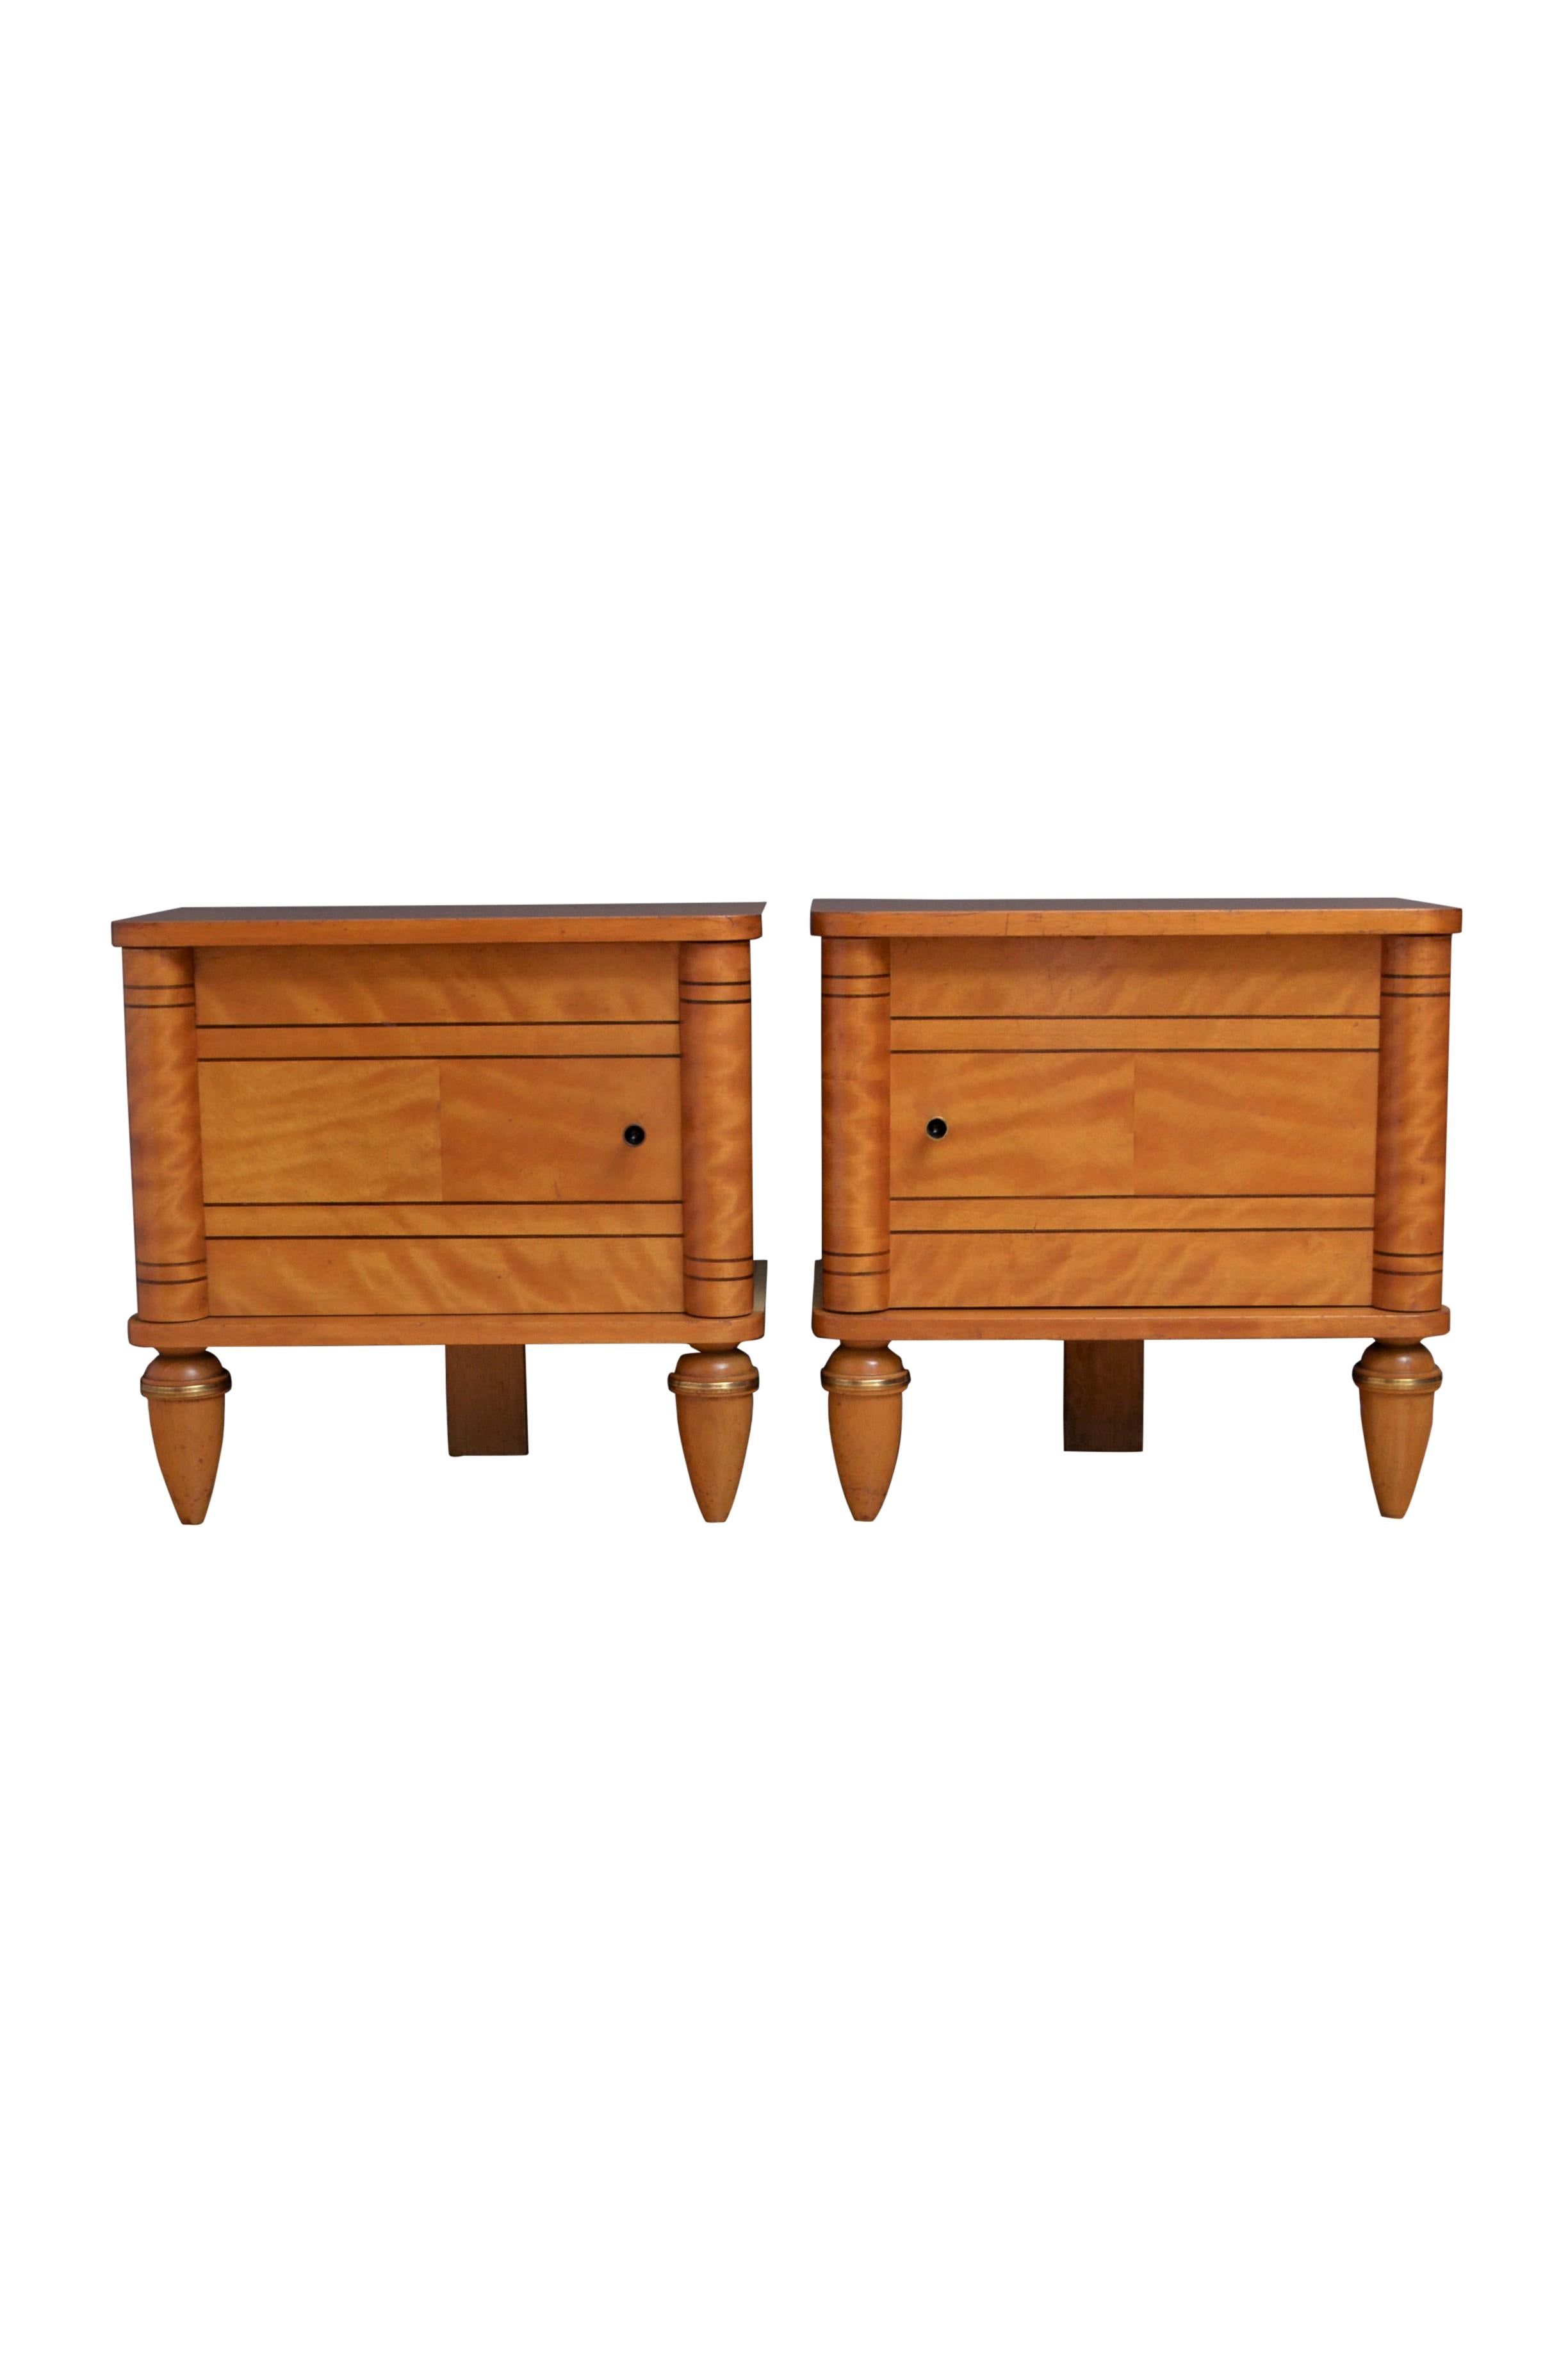 K0570 Attractive satin birch bedside cupboards, each having oversailing top with rounded corners above string inlaid door fitted with original handle and flanked by half columns, standing on turned, tapered legs with brass ring. This antique pair of